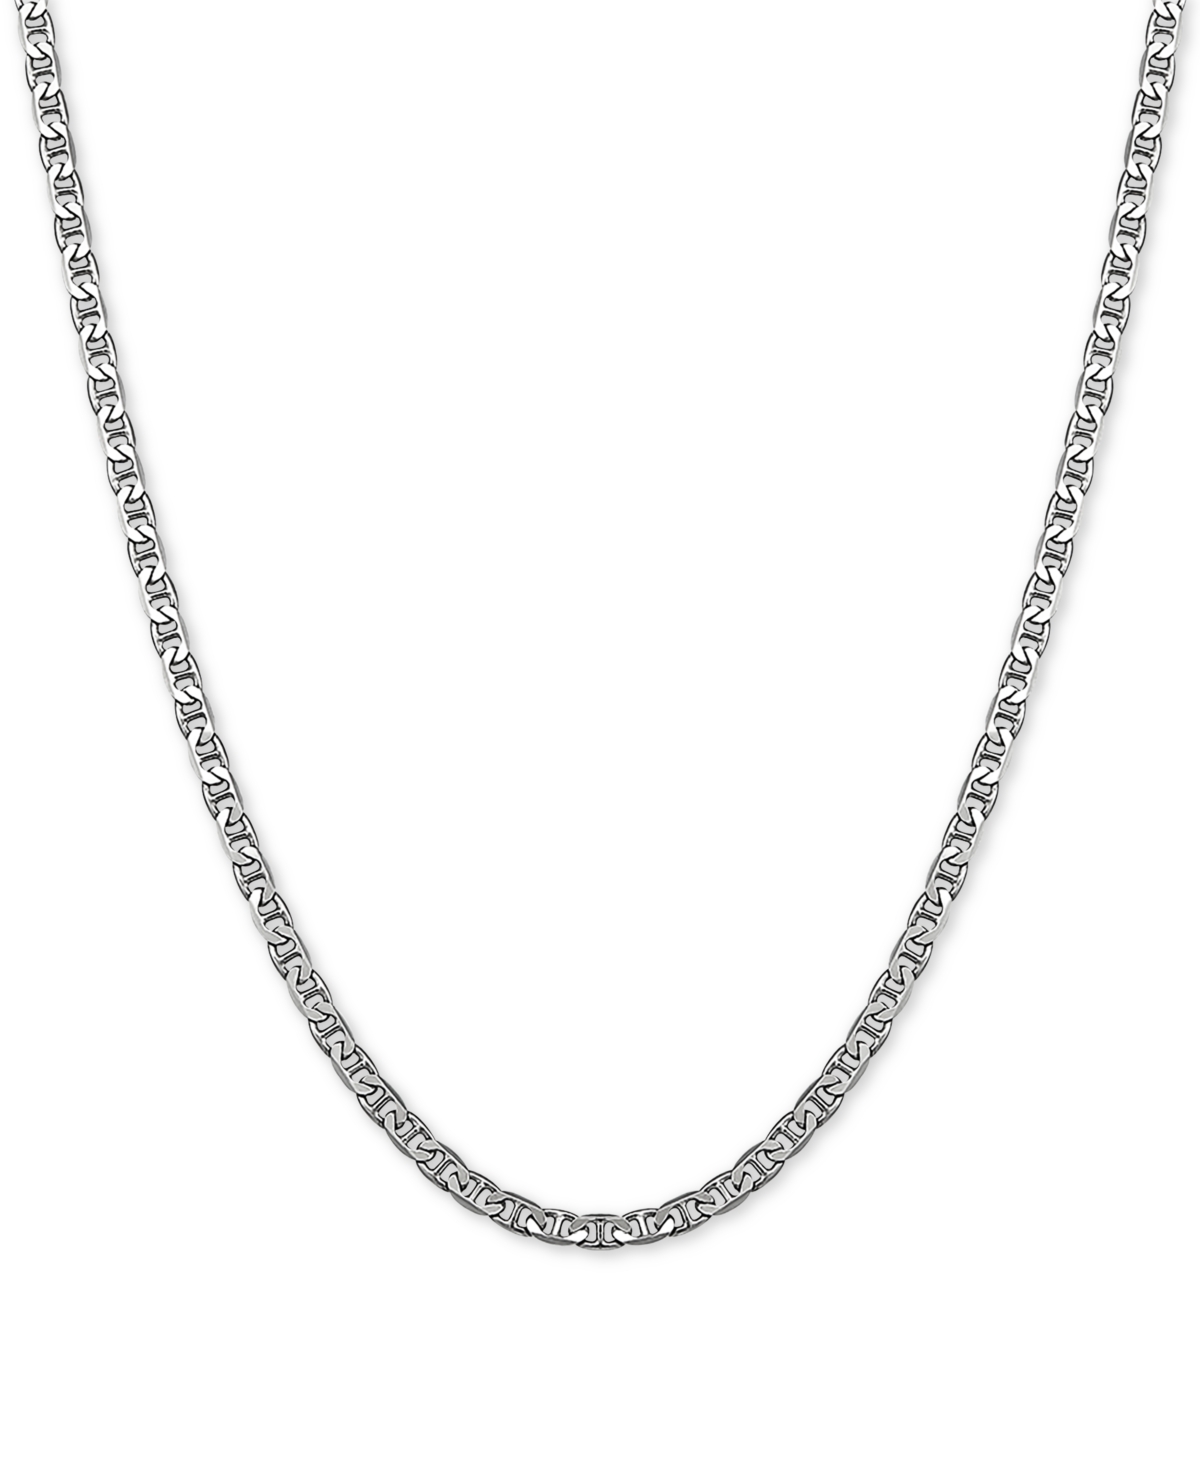 Mariner Link 18" Chain Necklace in Sterling Silver - Silver